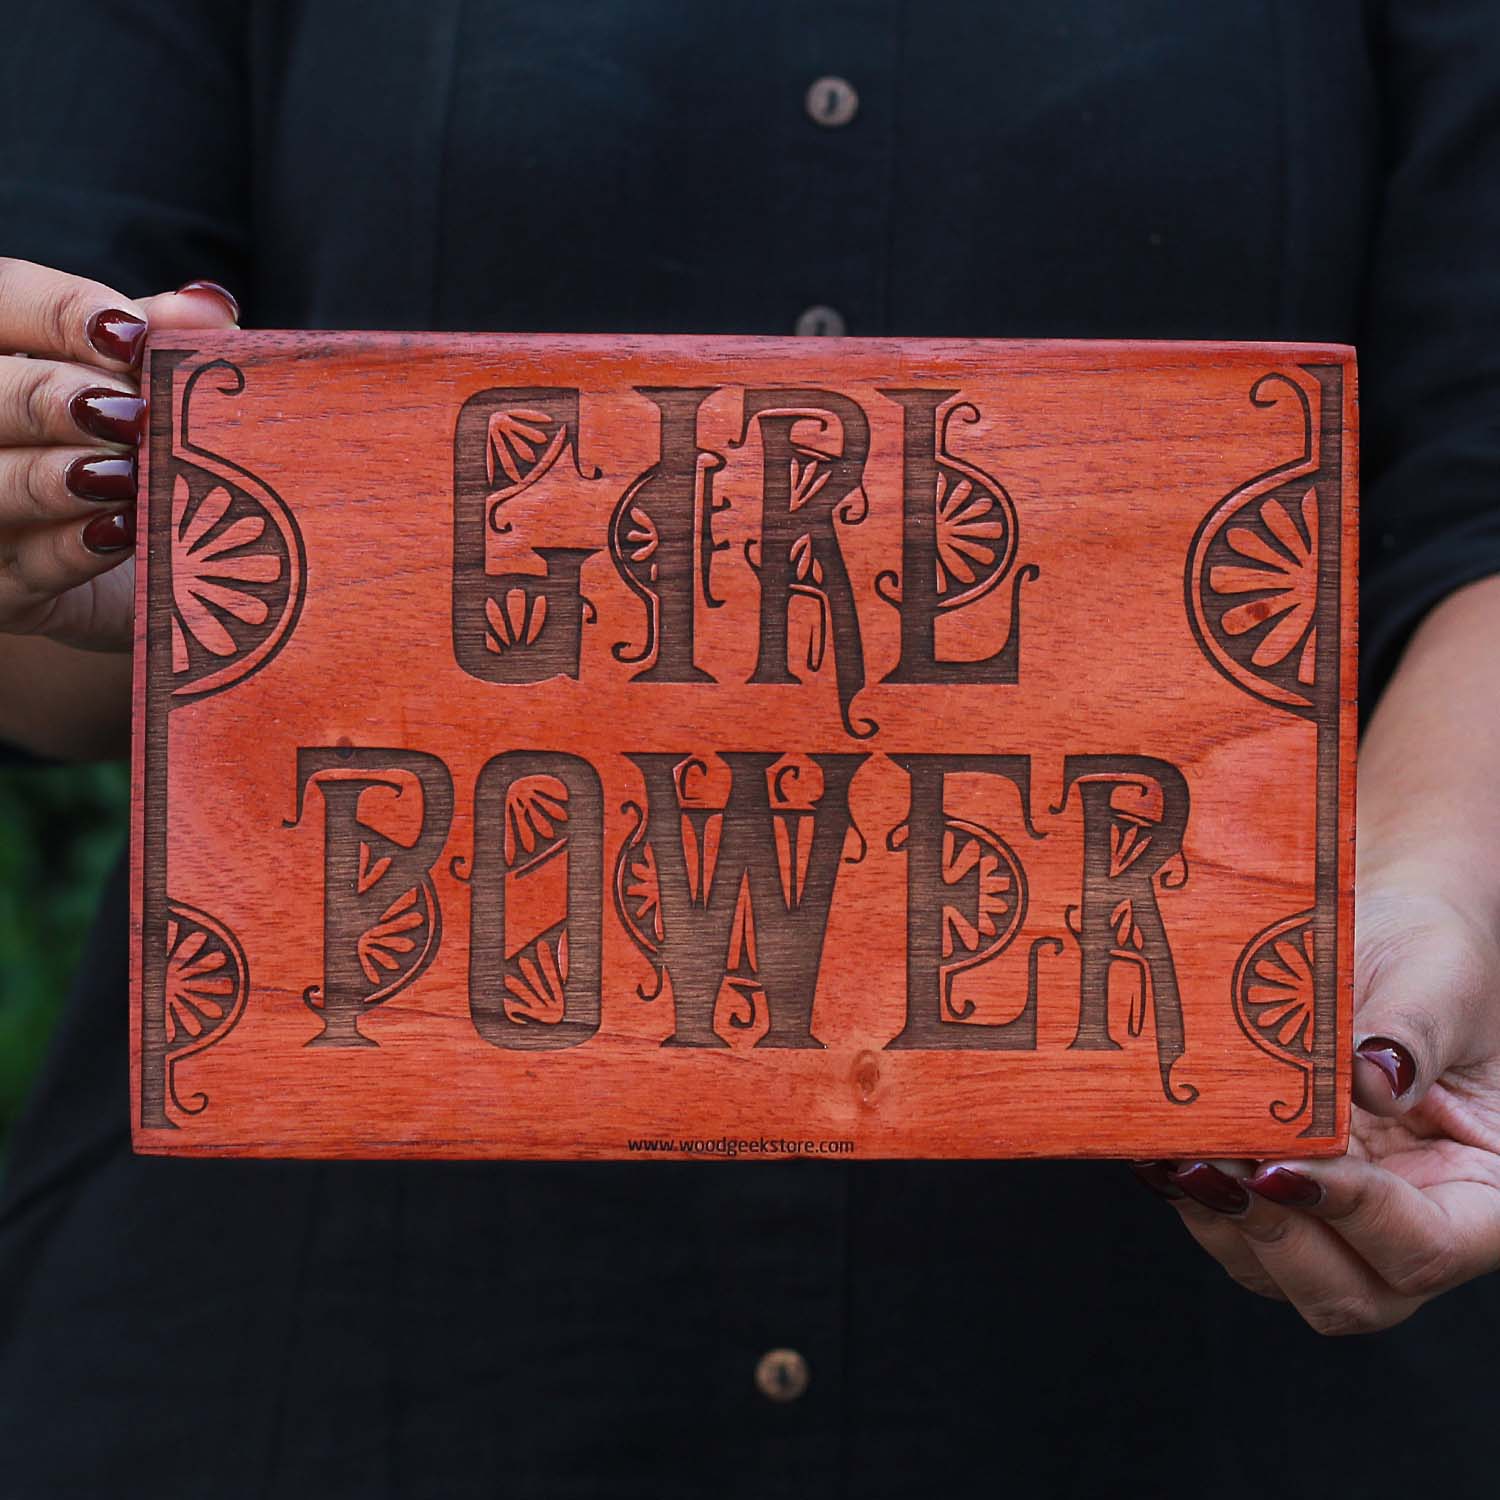 Girl Power Carved Wooden Poster - Wood Wall Art Decor by Woodgeek Store